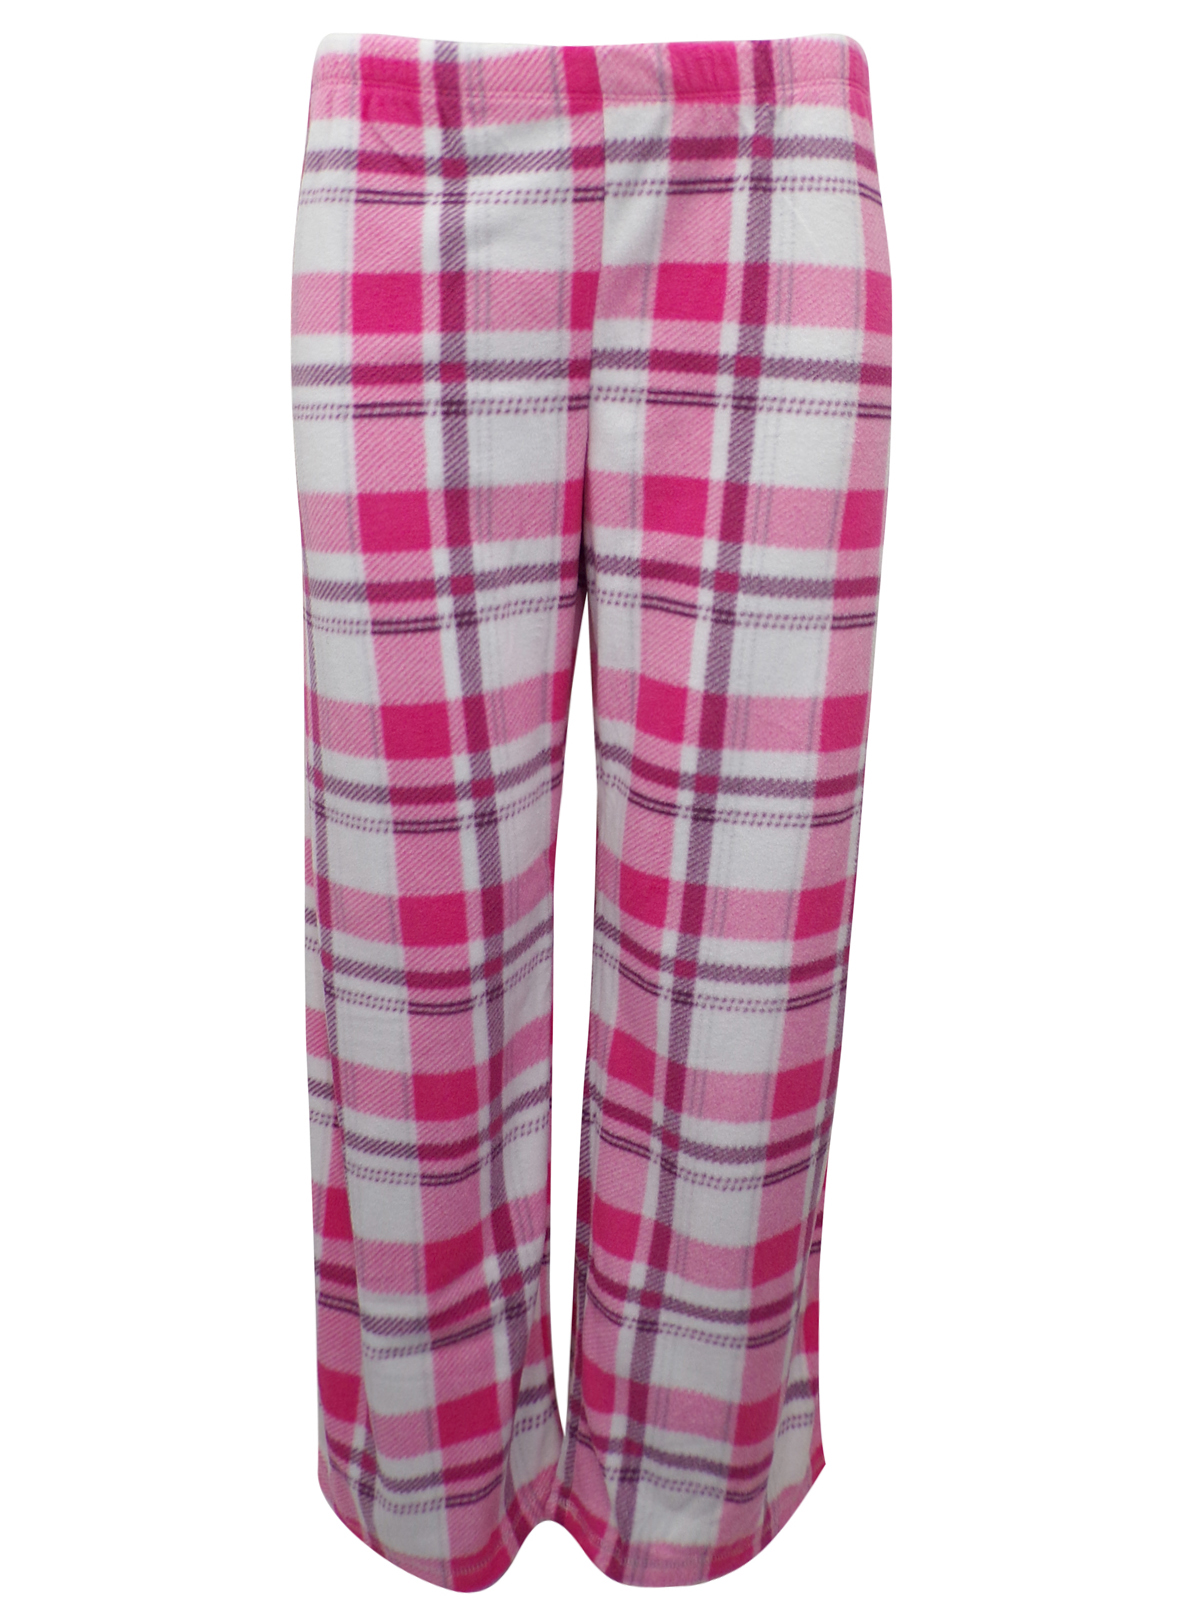 Marks and Spencer - - M&5 PINK Checked Print Fleece Pyjamas - Size 10 to 22